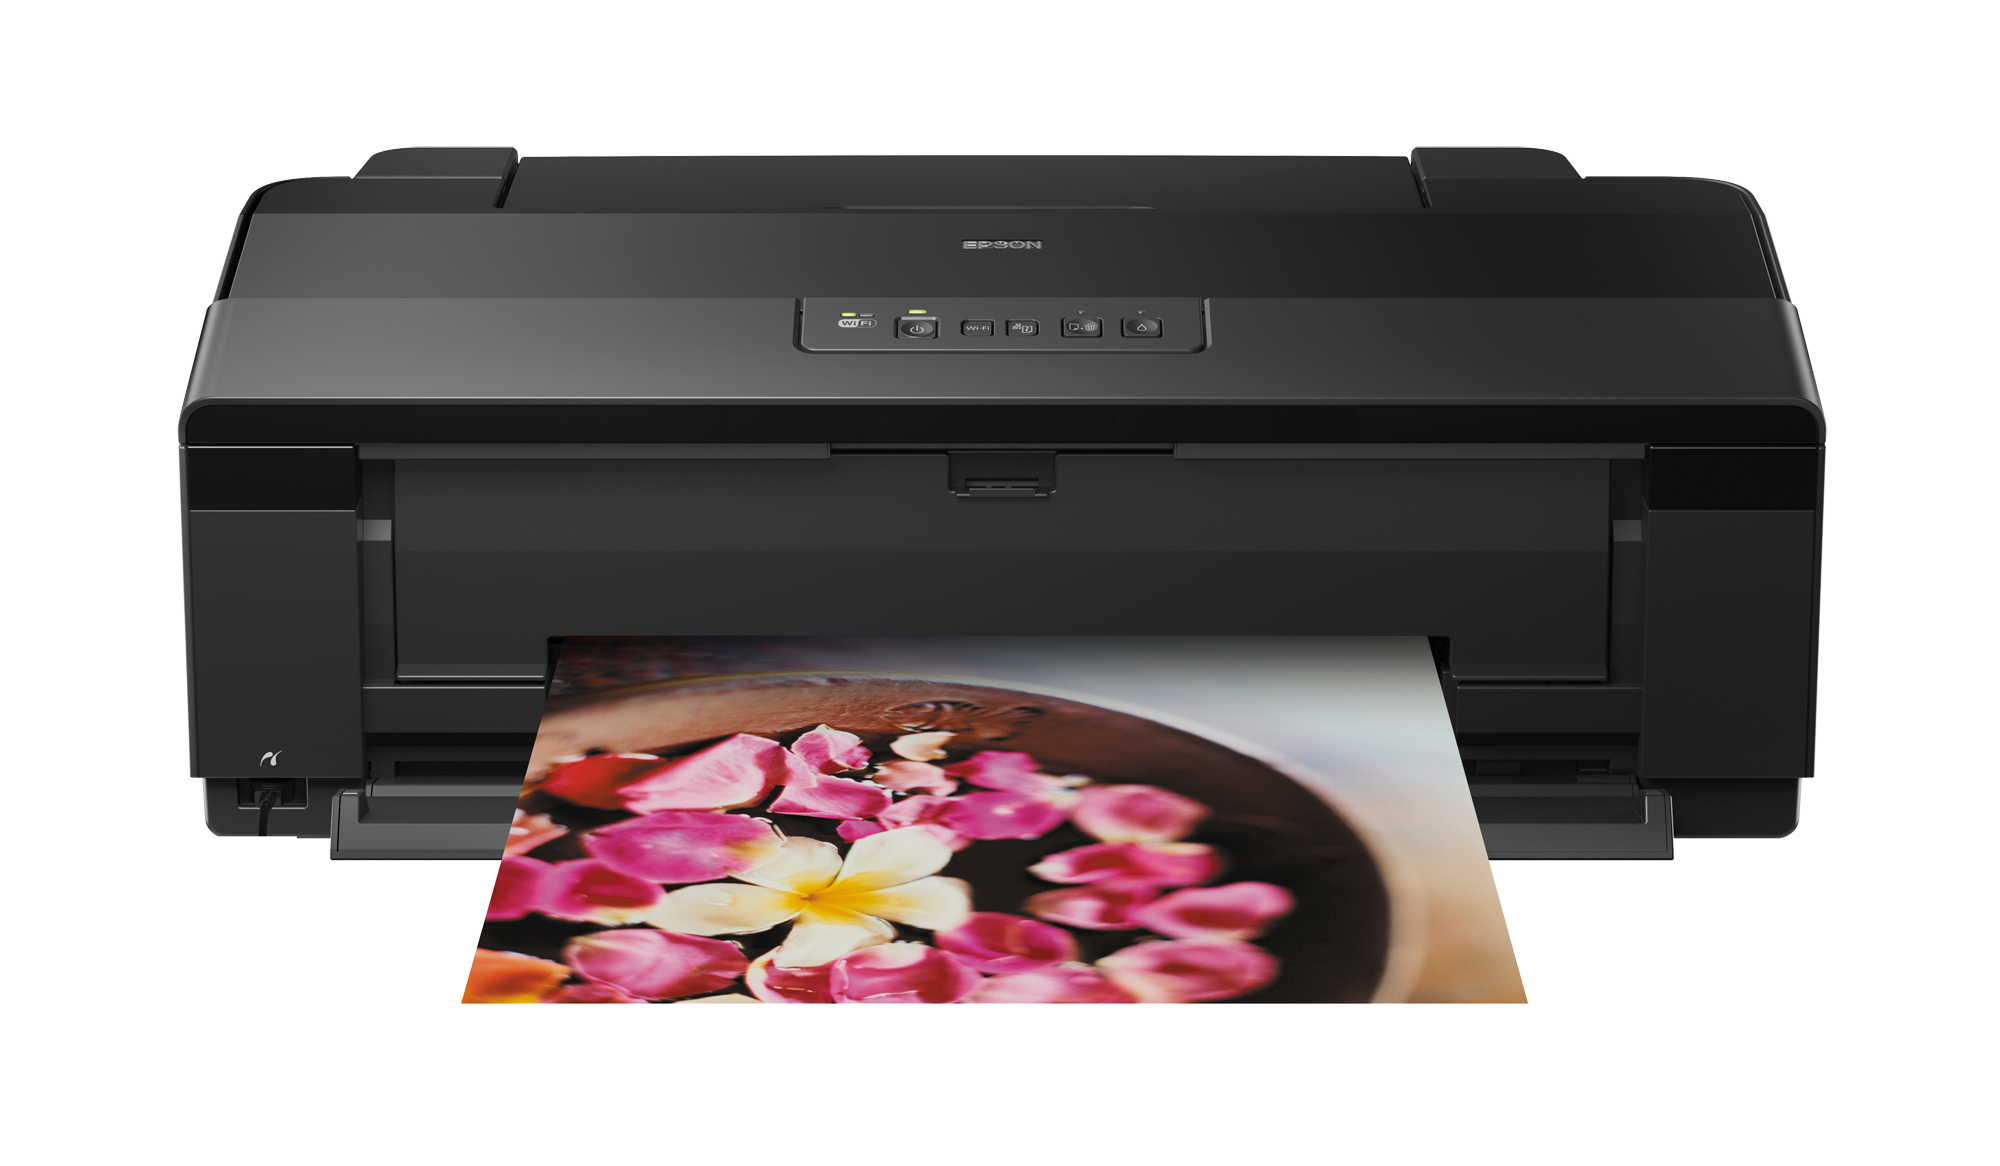 Voorstad Auto Vulkaan Epson Stylus Photo 1500W | ProPhoto and Graphic Arts | Inkjet Printers |  Printers | Products | Epson Europe